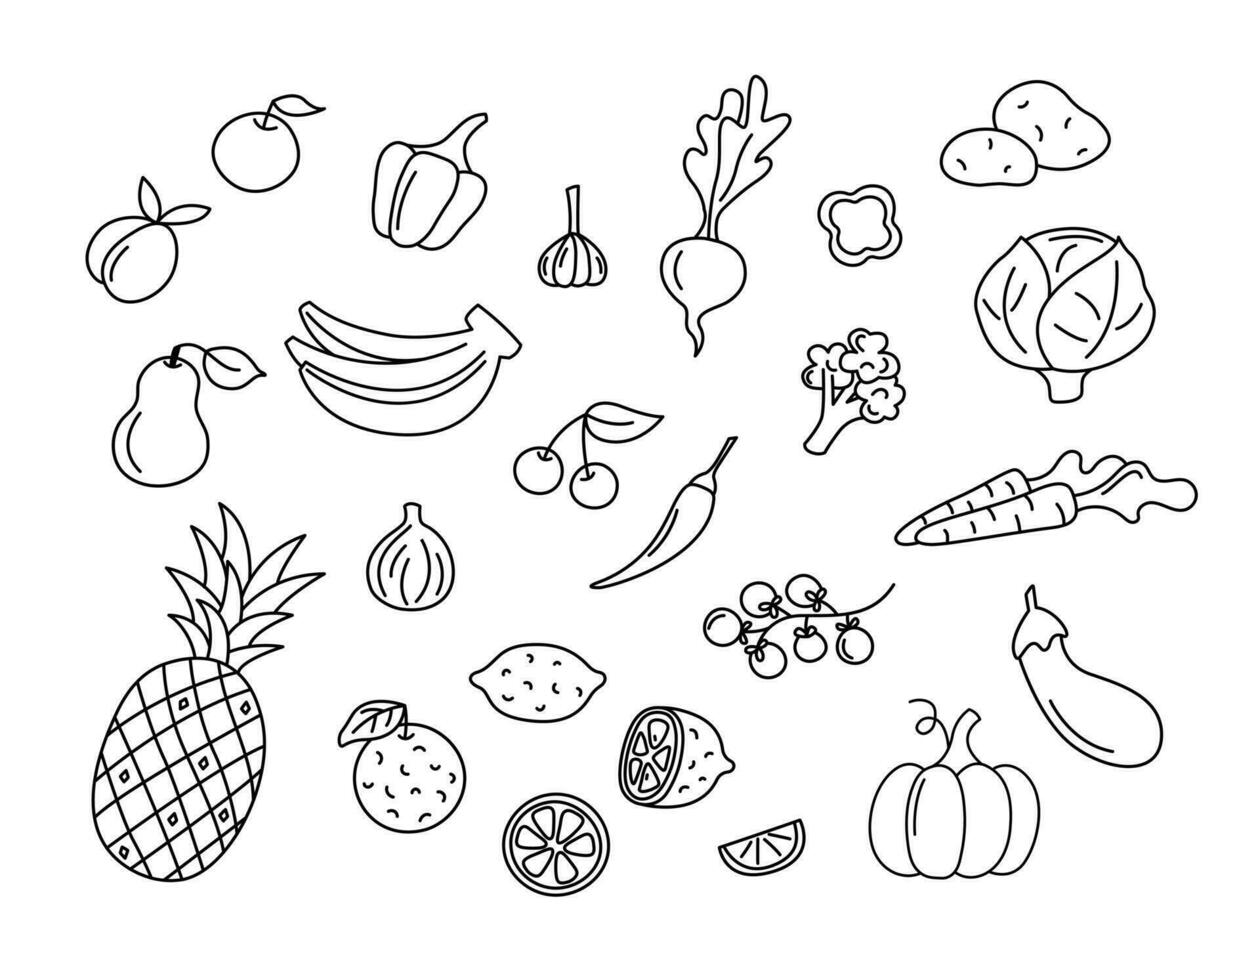 Fruits and vegetables vector doodles set. Raw food elements isolated black on white background. Hand drawn outline illustration of pineapple, bananas, pumpkin and carrots.